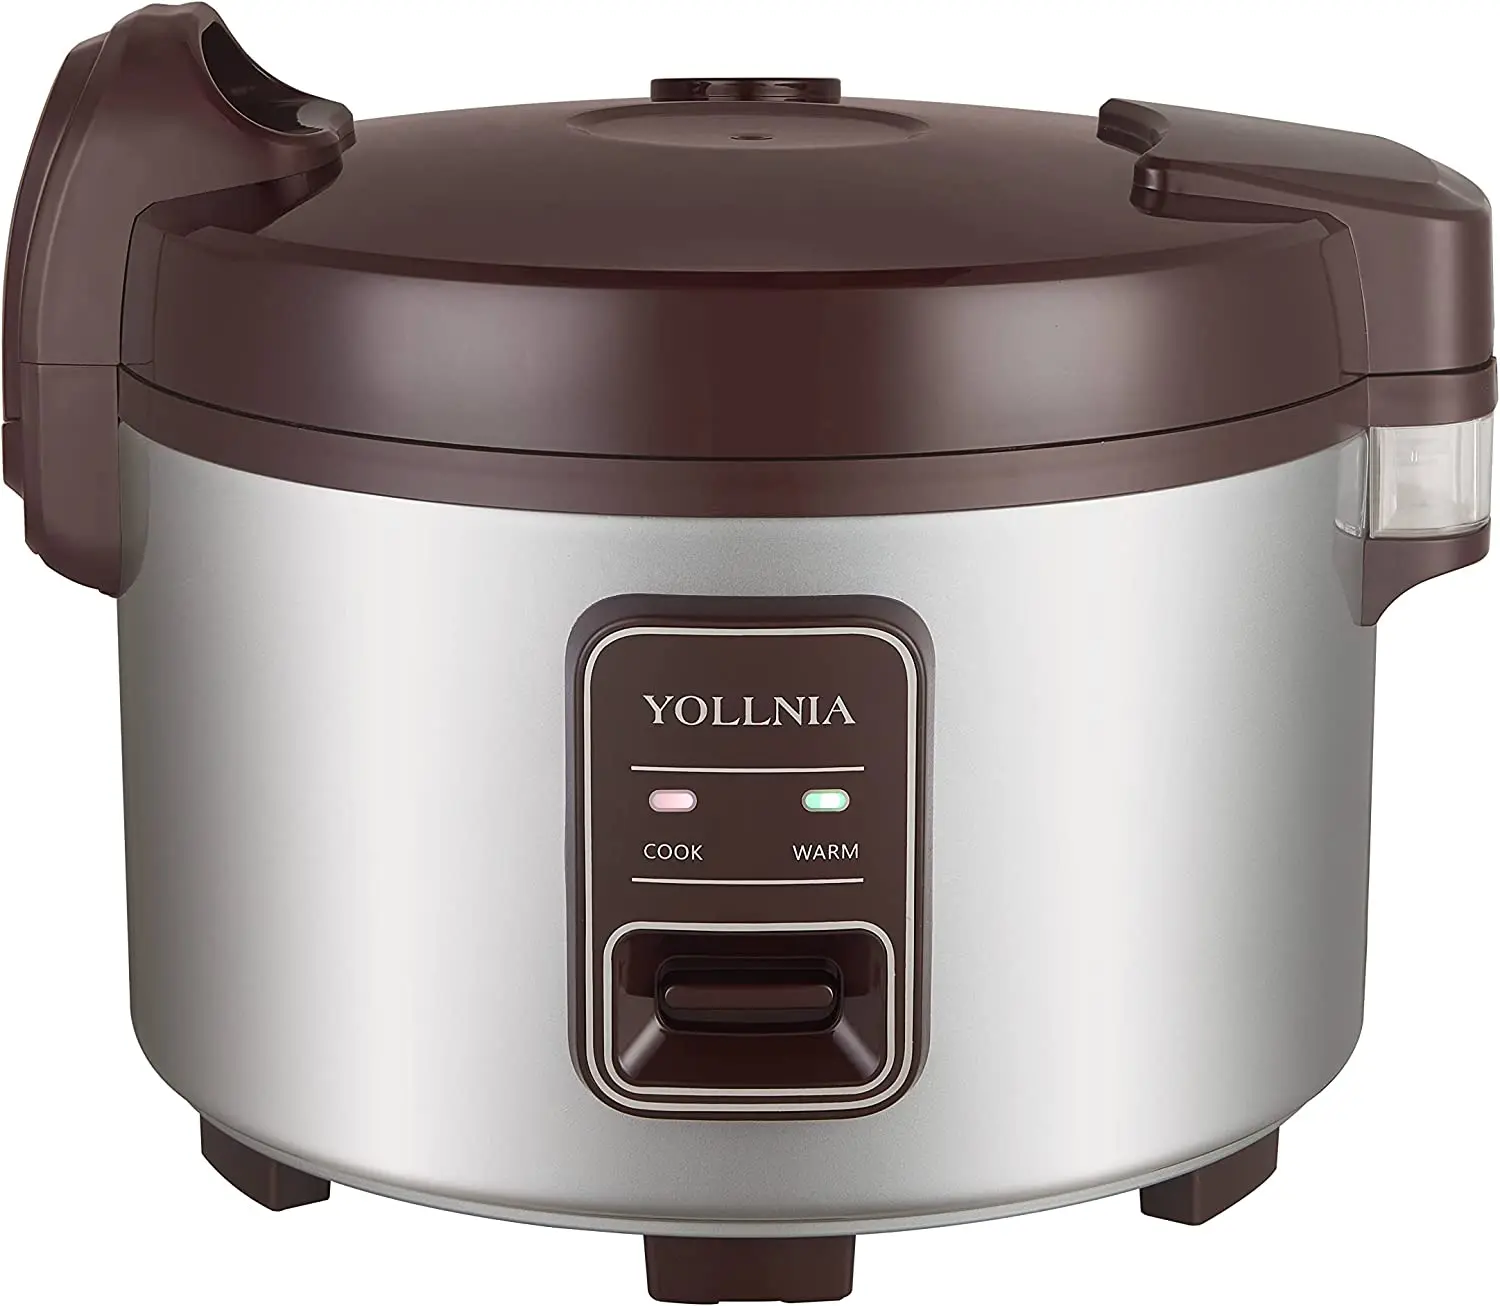 

Commercial Large Rice Cooker & food warmer | 13.8QT/60 Cups cooked rice | with Non-stick Inner Pot,1350W Fast Cooking rice |